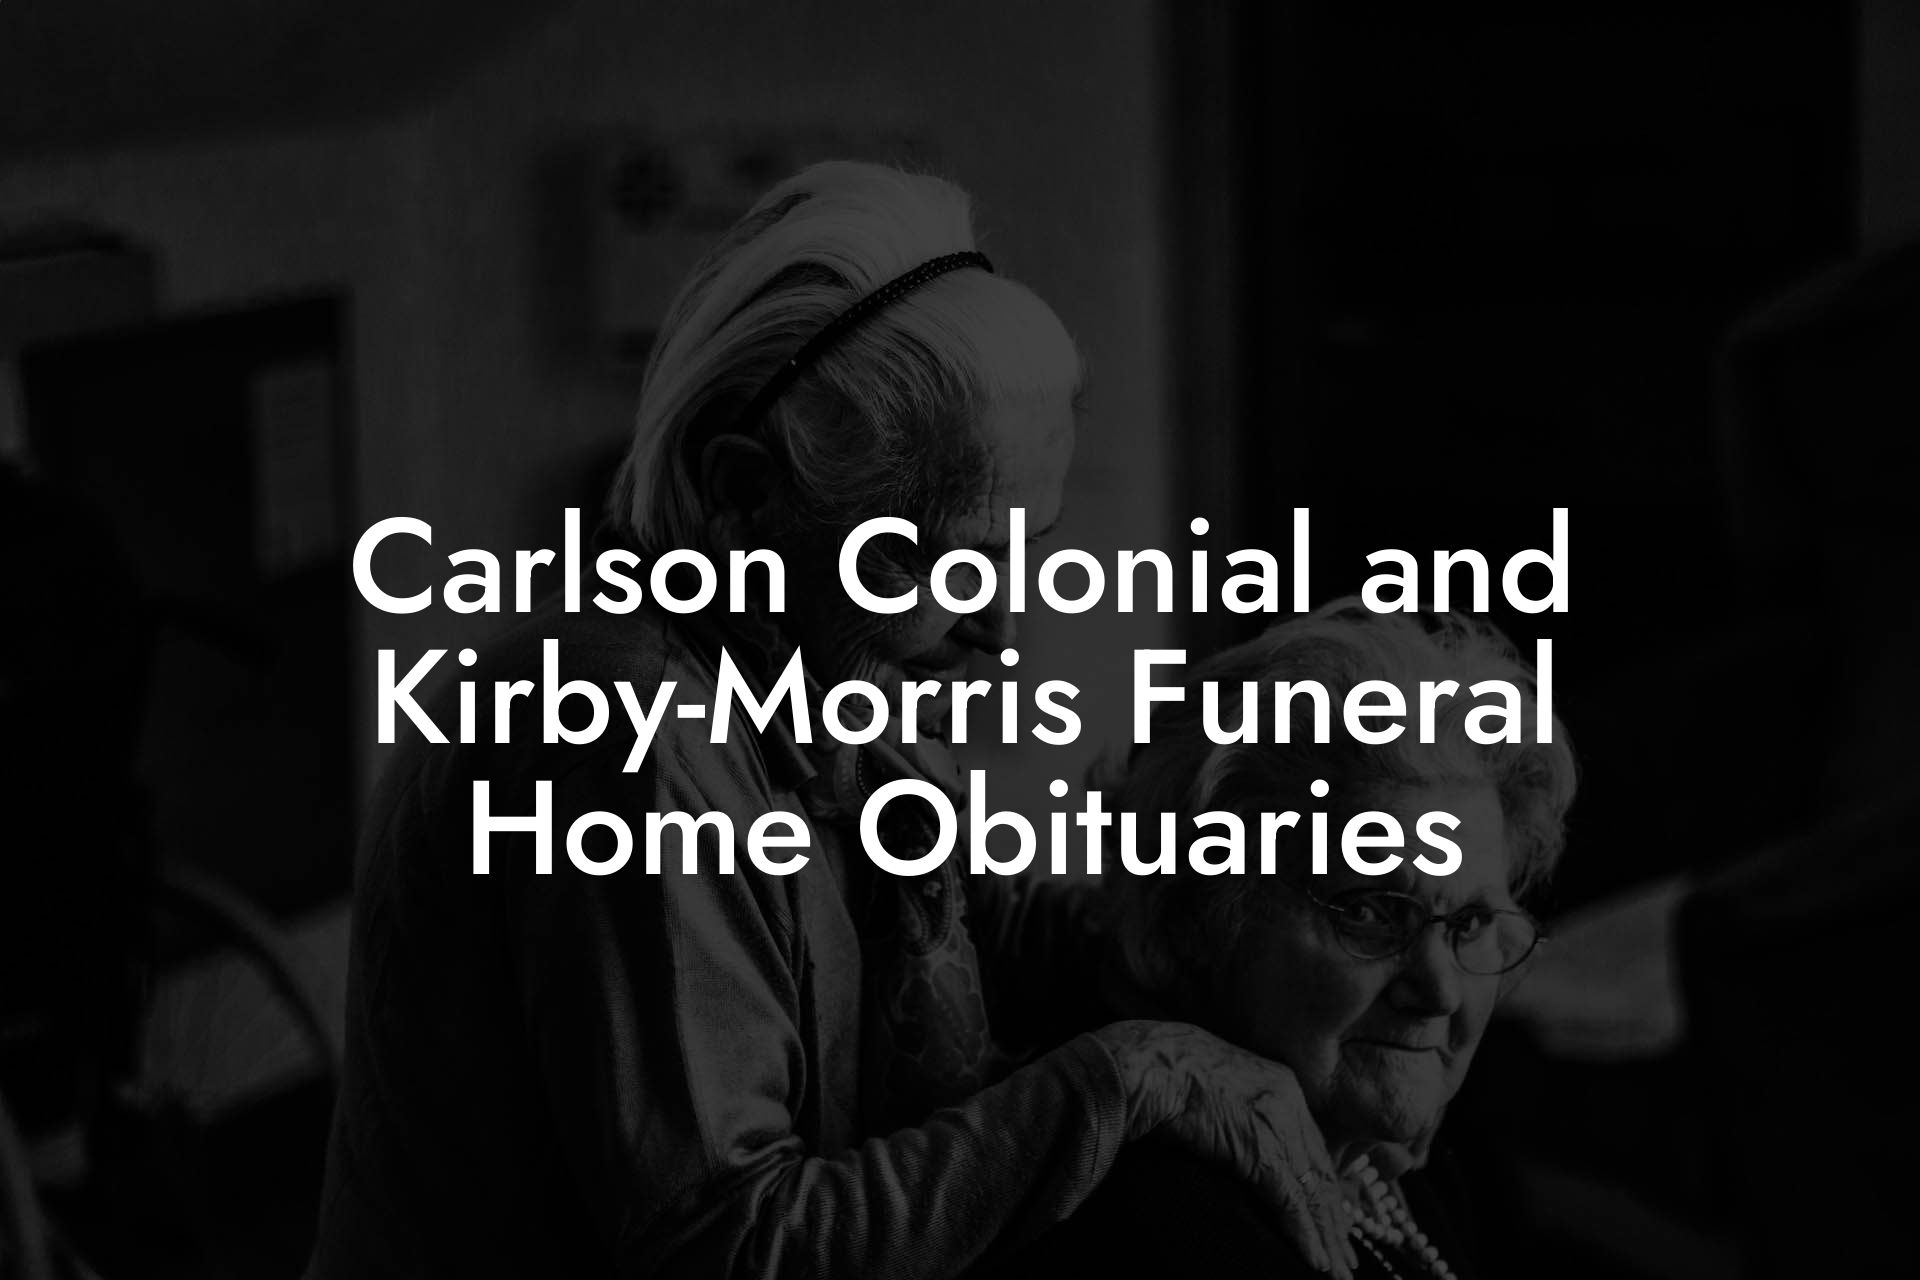 Carlson Colonial and Kirby-Morris Funeral Home Obituaries